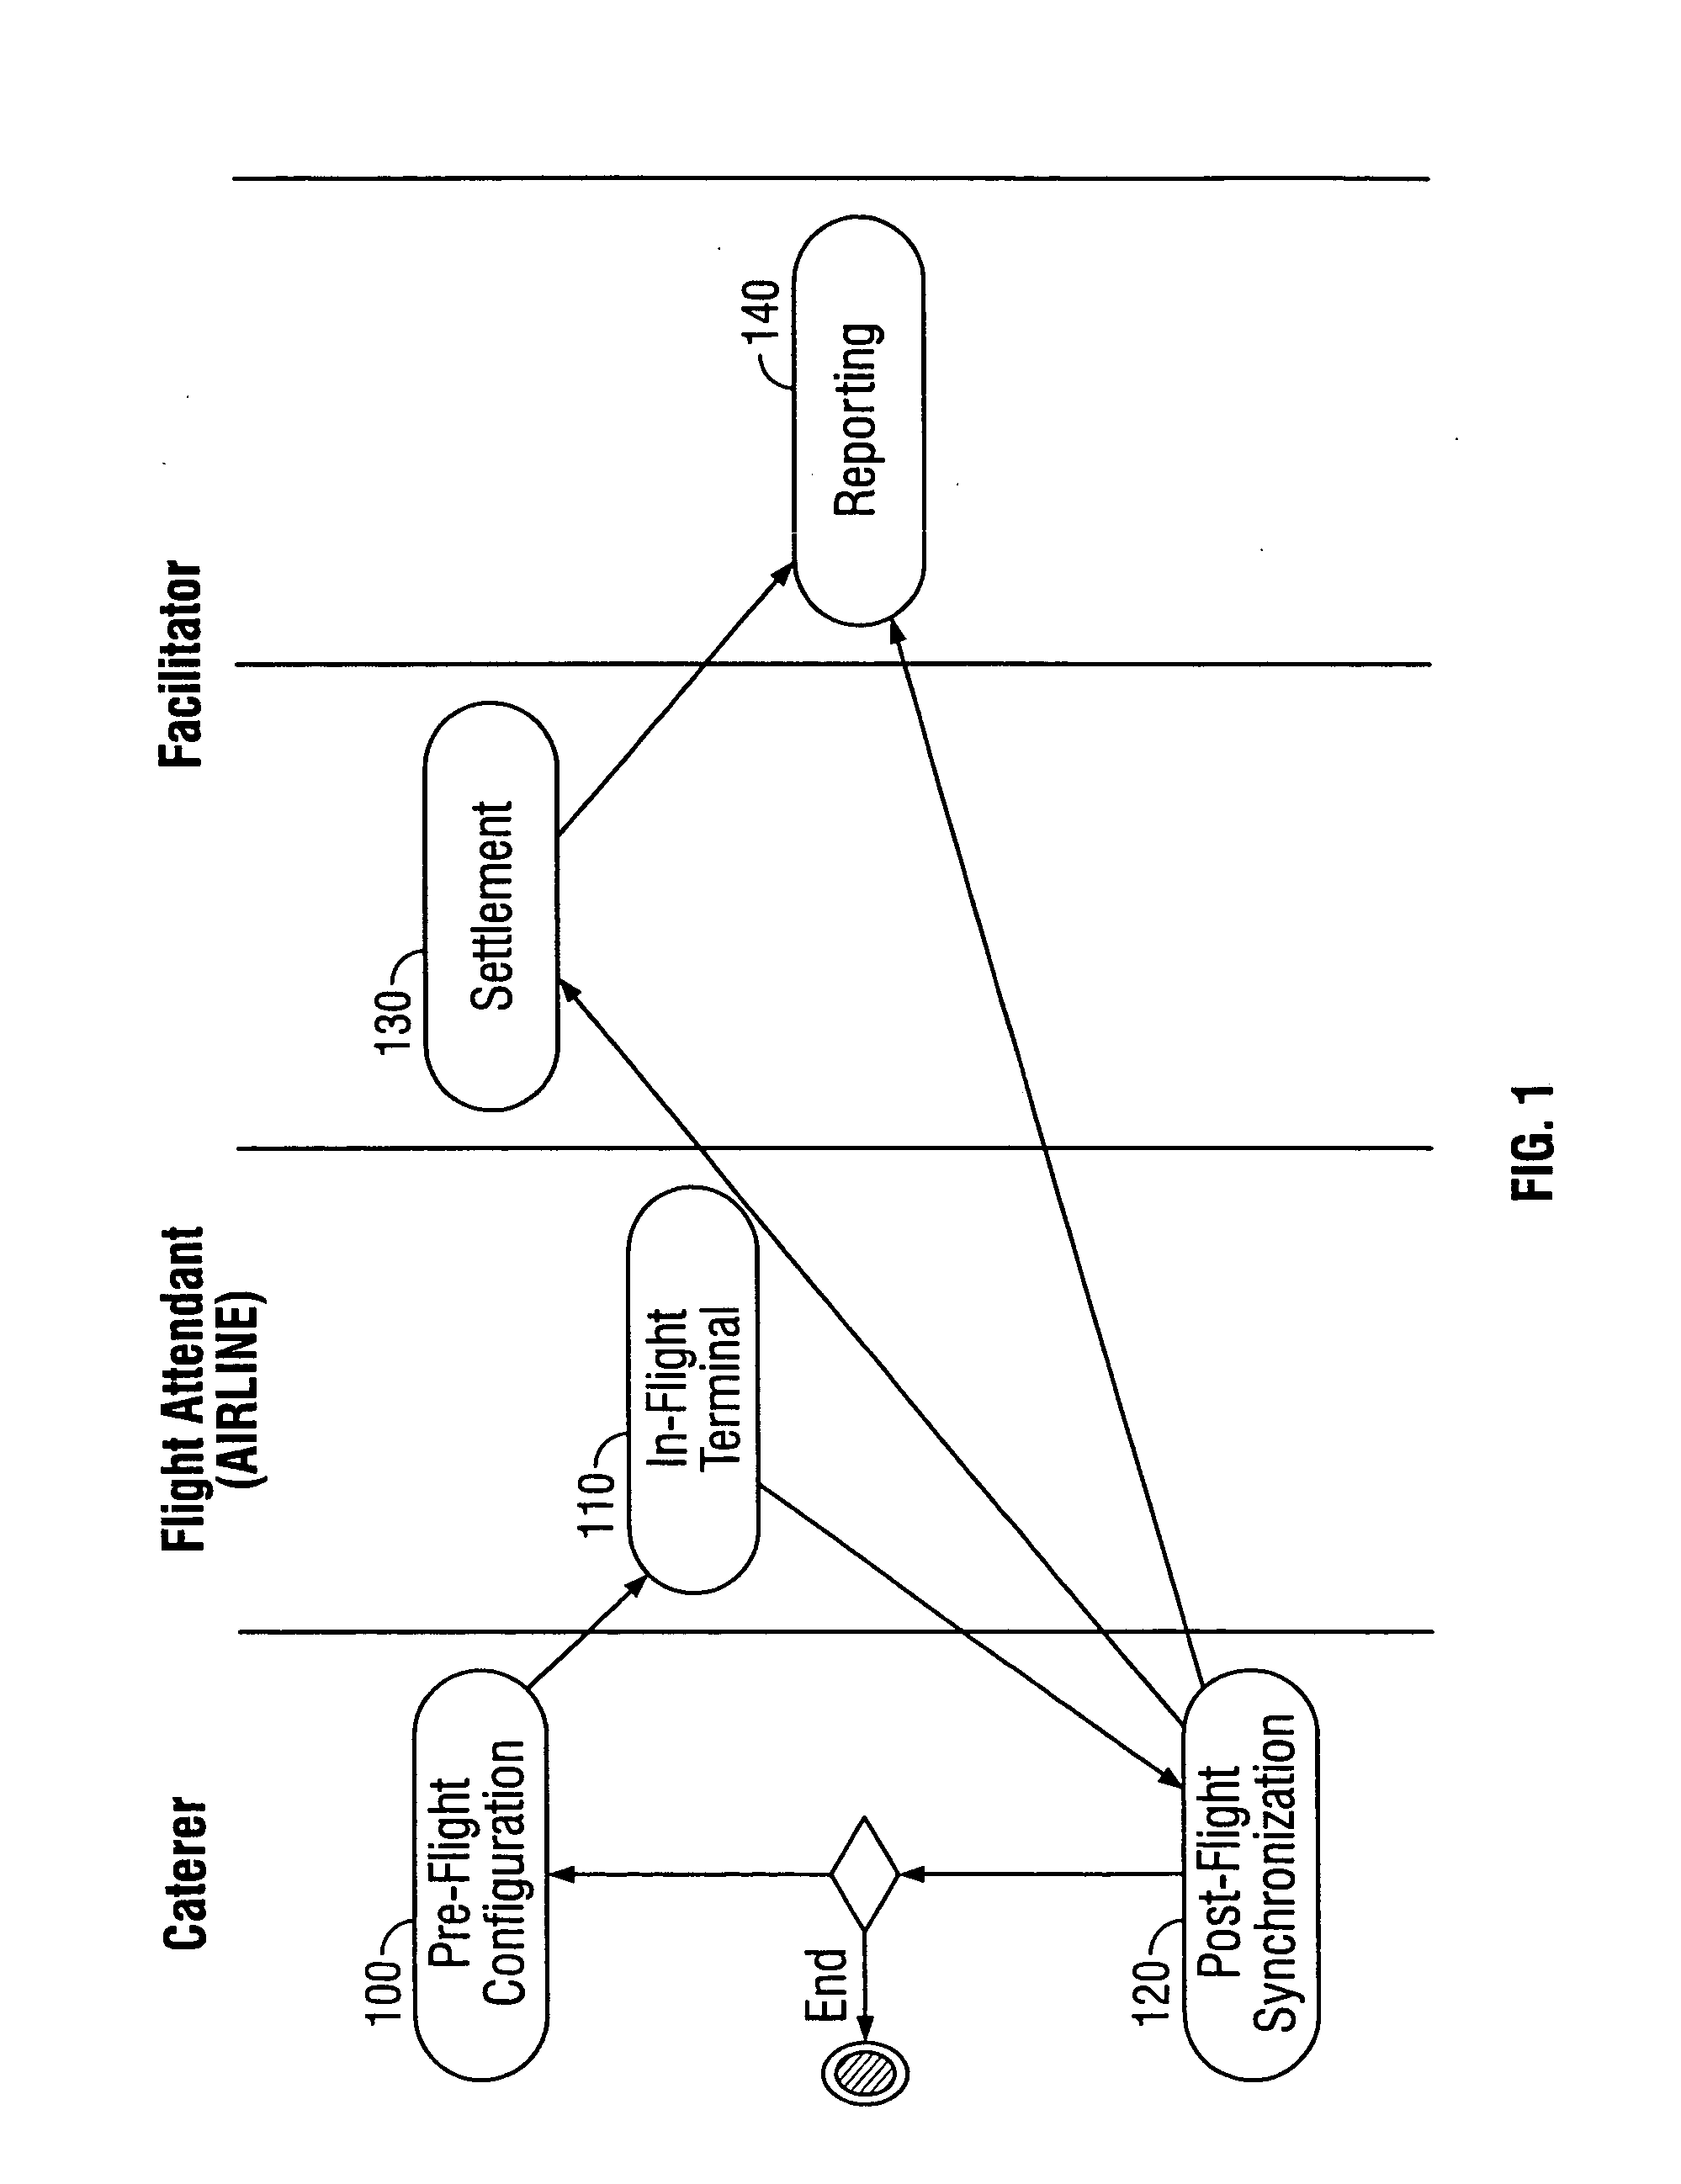 System and method for sales and service reconciliation